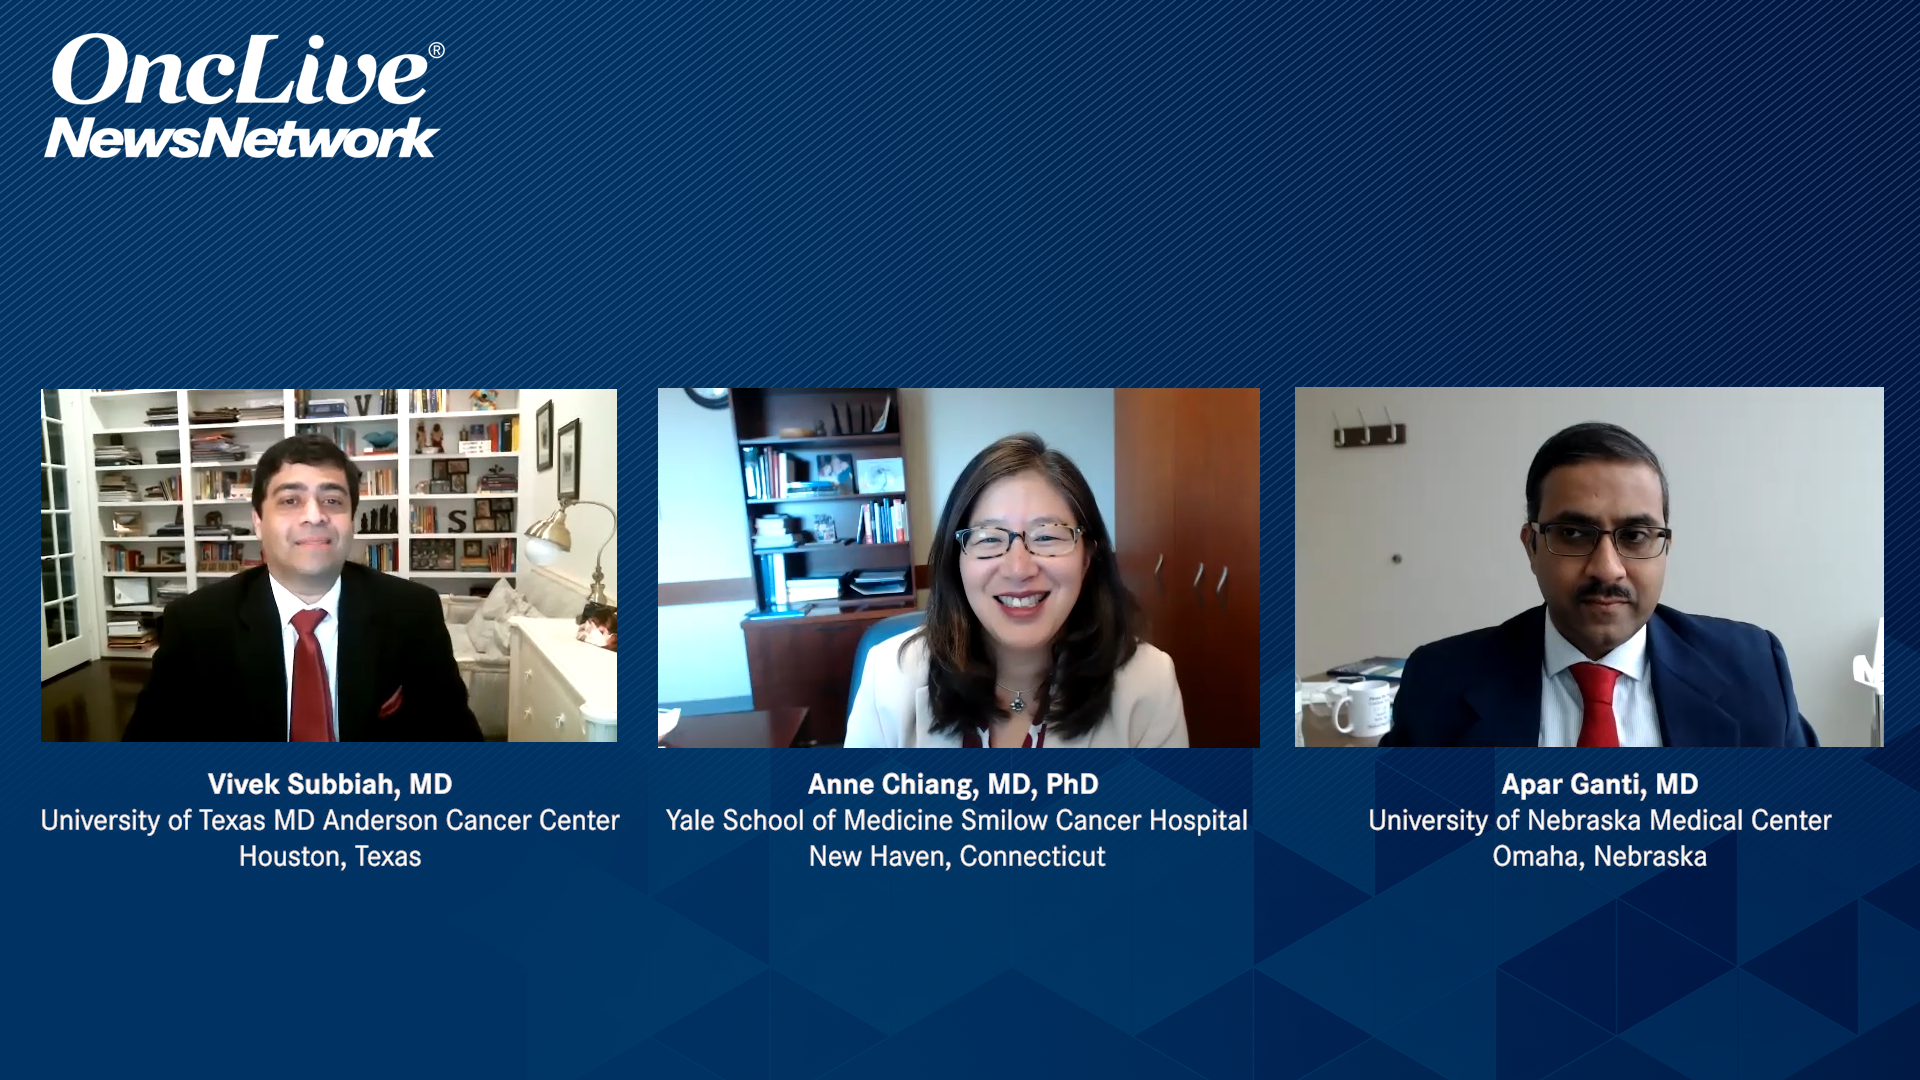 Recent Advances in Small-Cell Lung Cancer